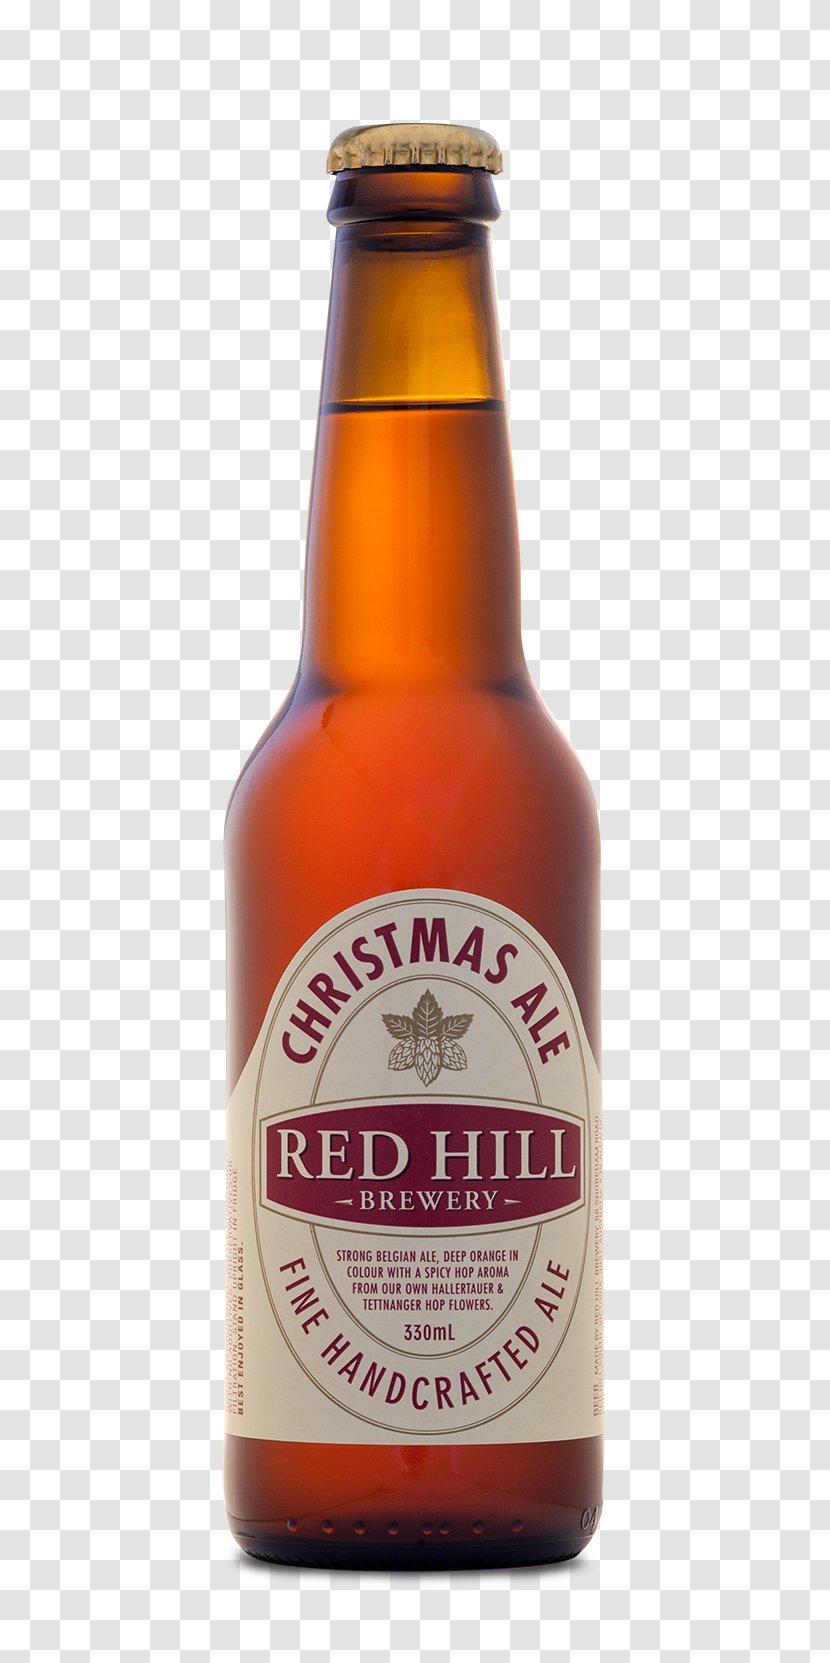 Ale Red Hill Brewery Beer Bottle Lager - Glass Transparent PNG